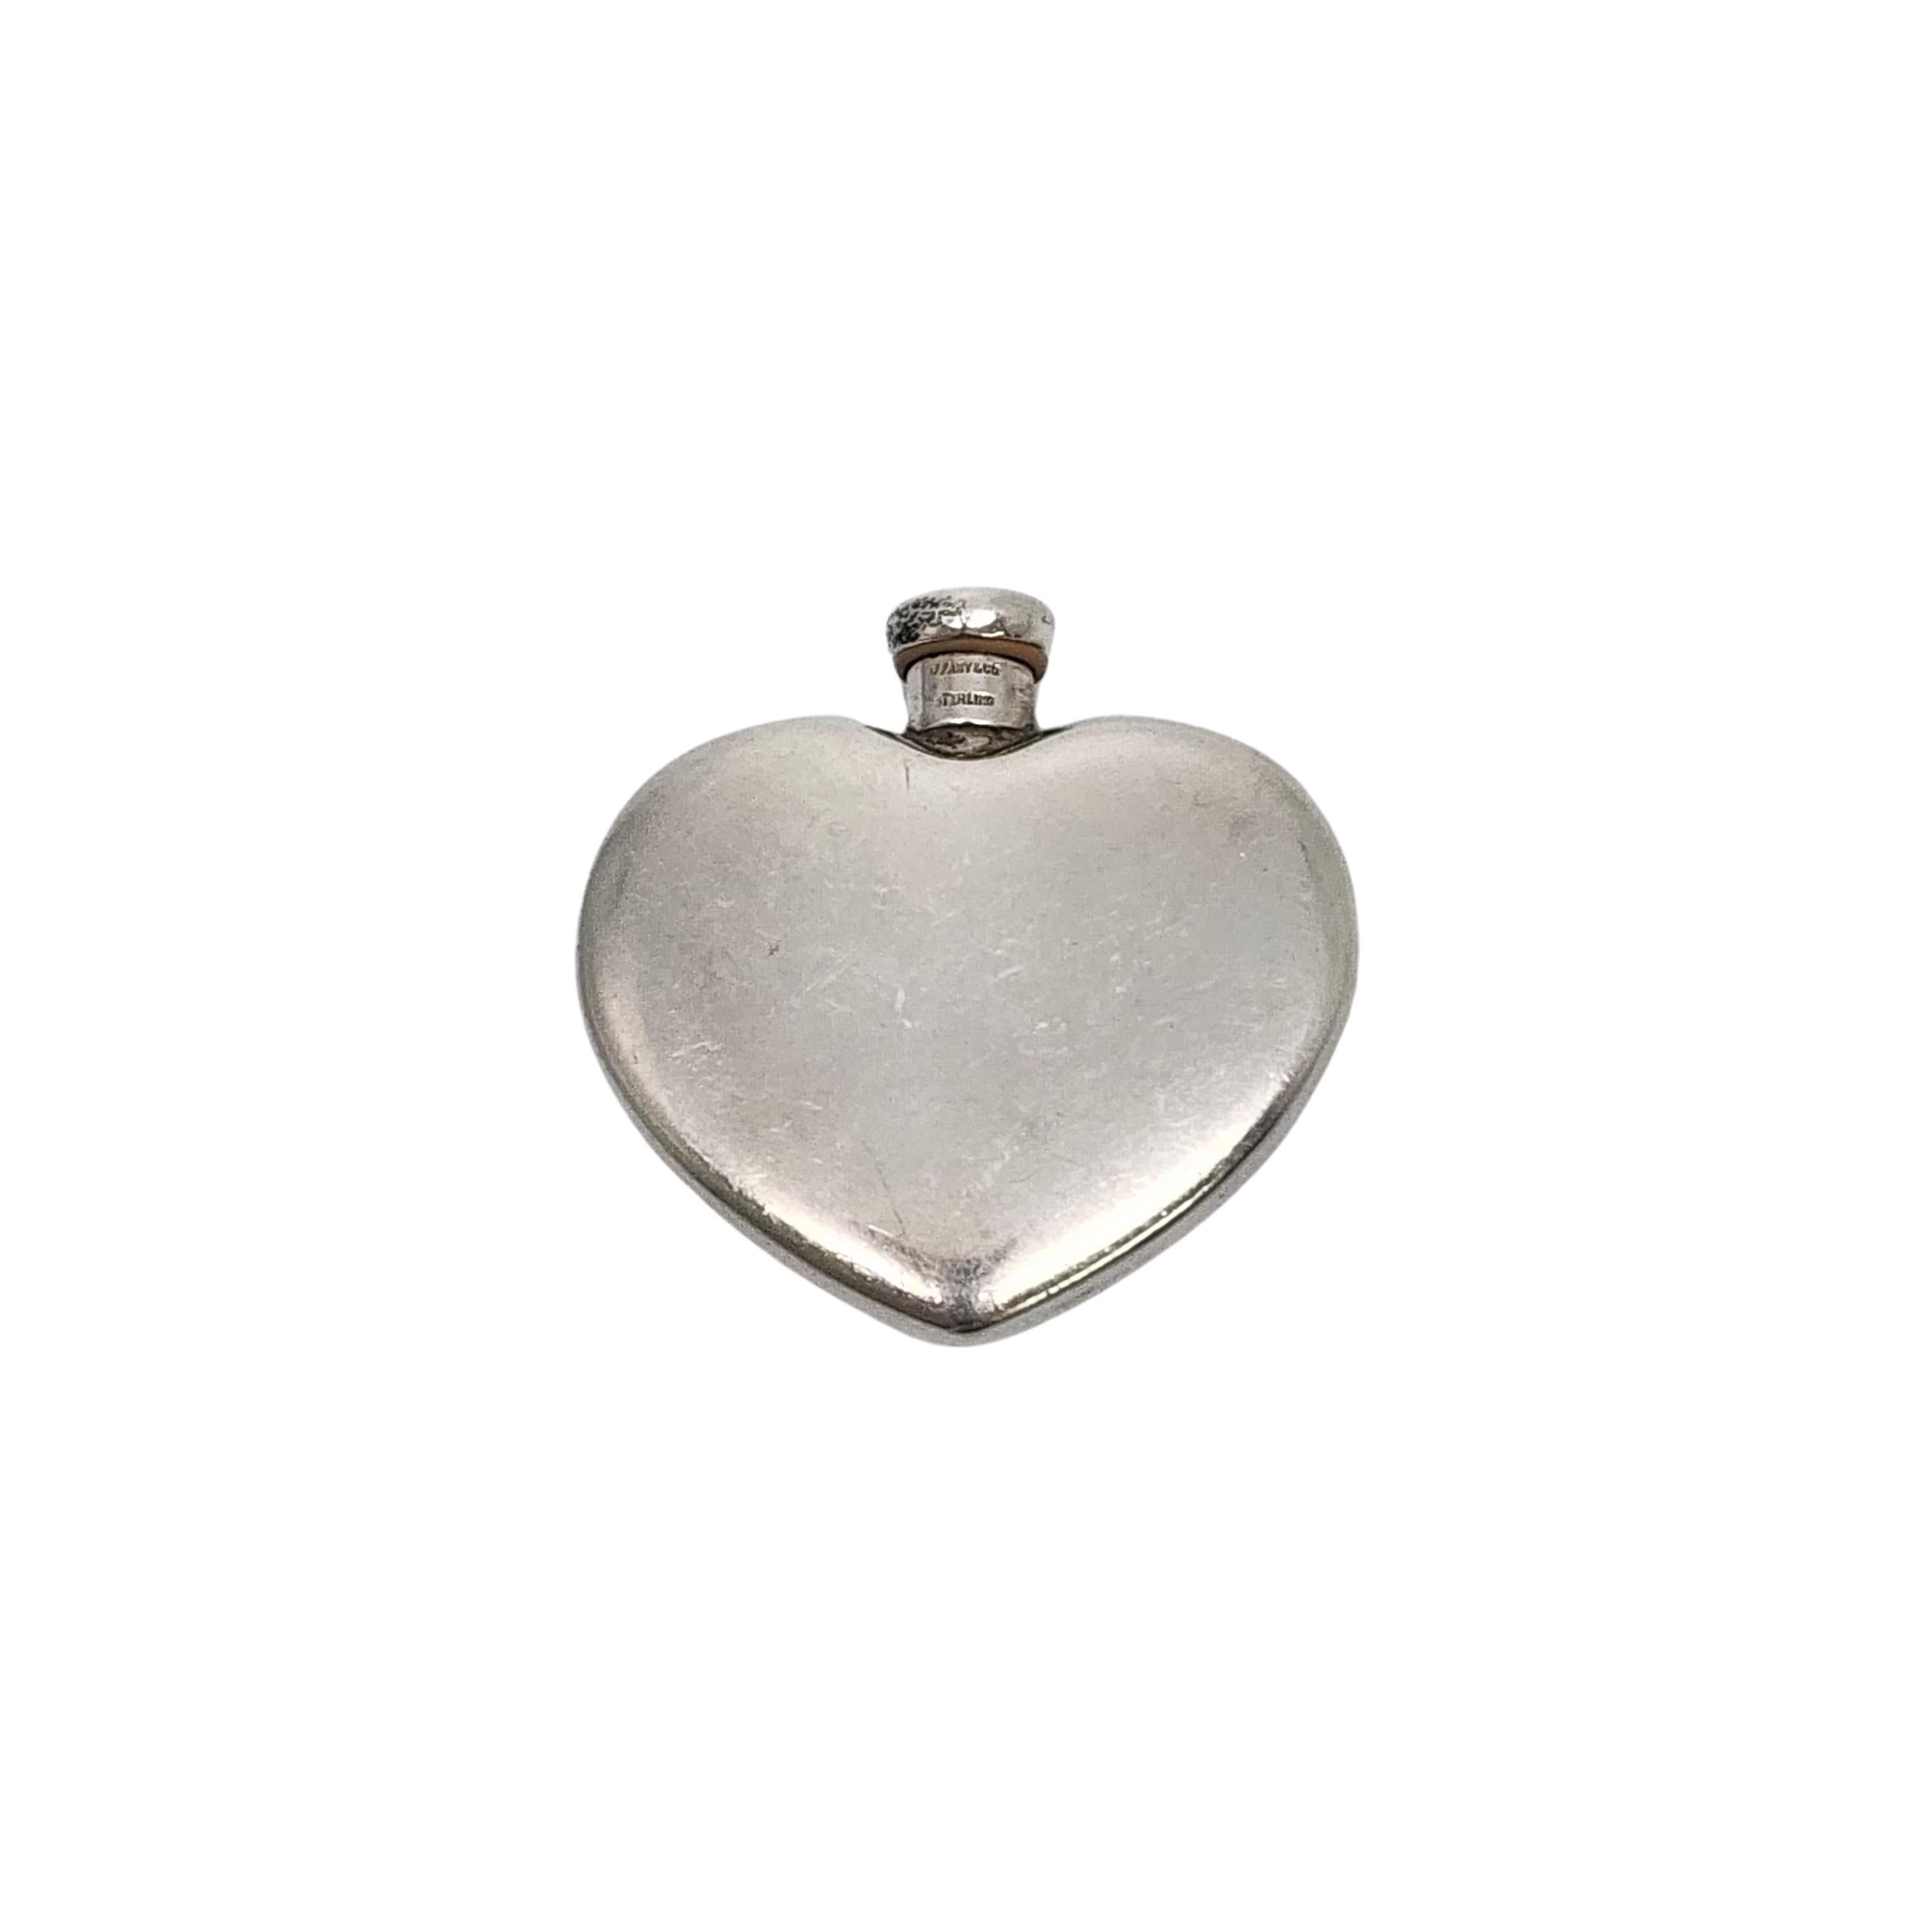 Vintage sterling silver heart perfume bottle by Tiffany & Co with monogram.

Monogram appears to be CMG

This beautiful scent bottle features a heart shaped bottle with smooth polished design on both sides and a screw-off top with dauber attached.